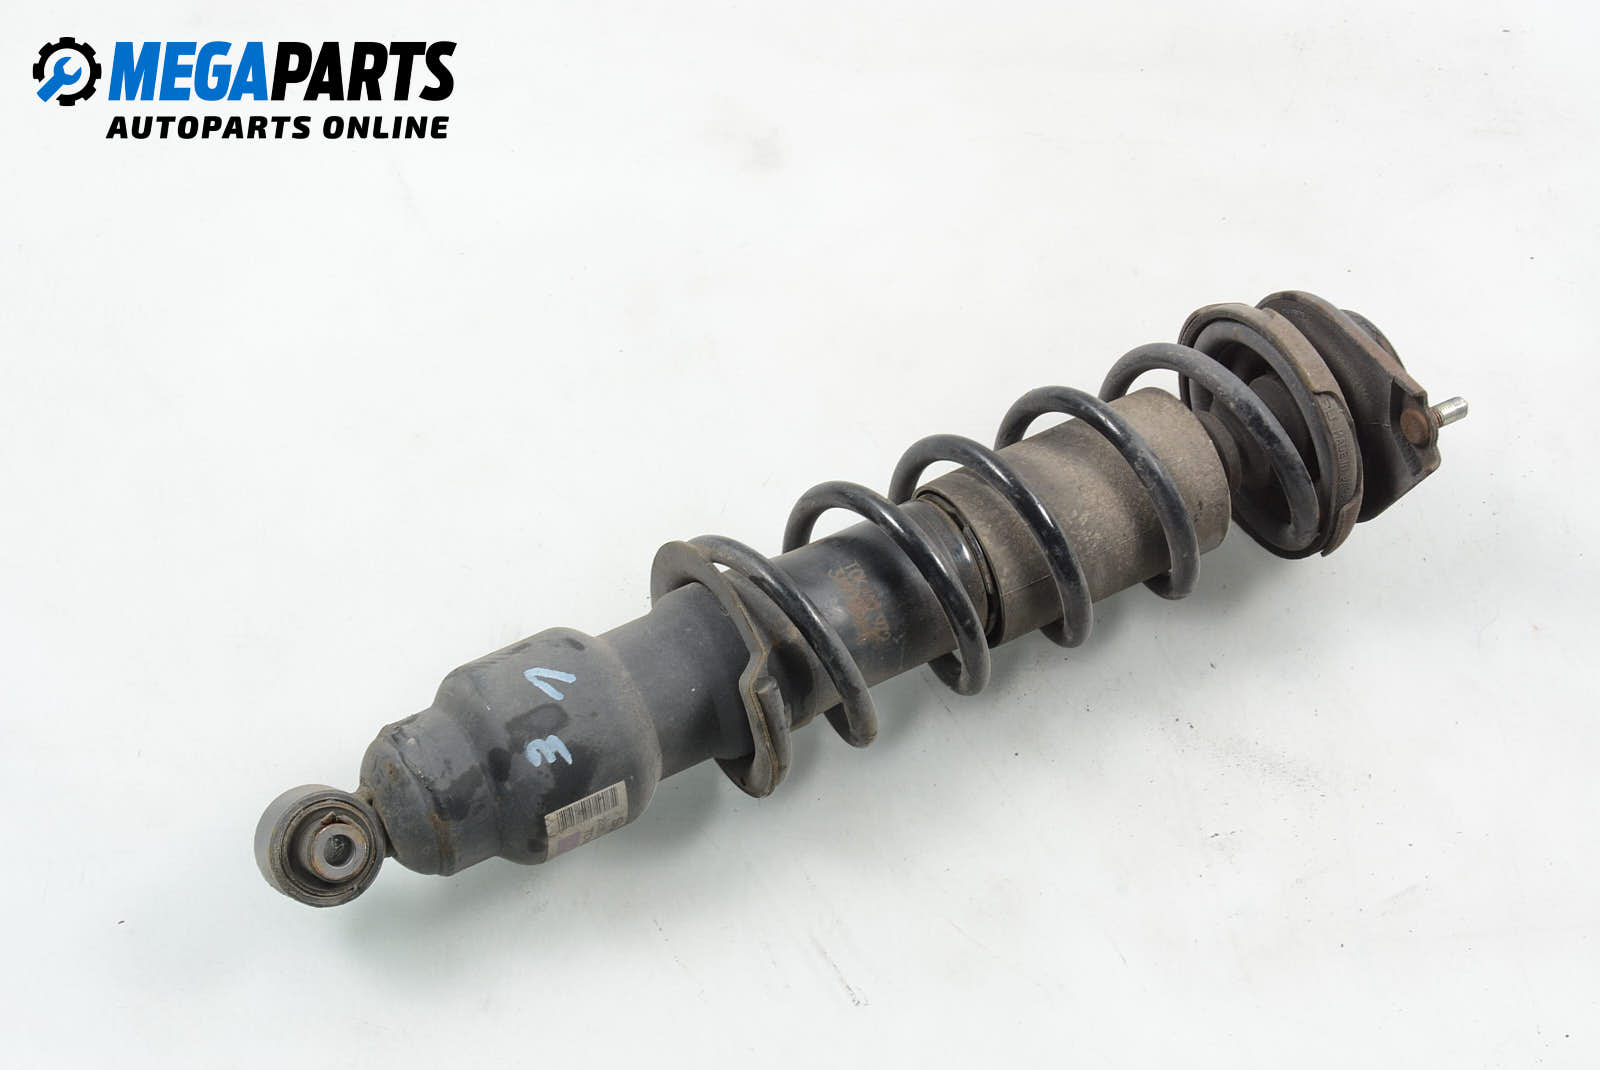 Fits SUBARU LEGACY OUTBACK B10 Front Shock Absorber Boot 